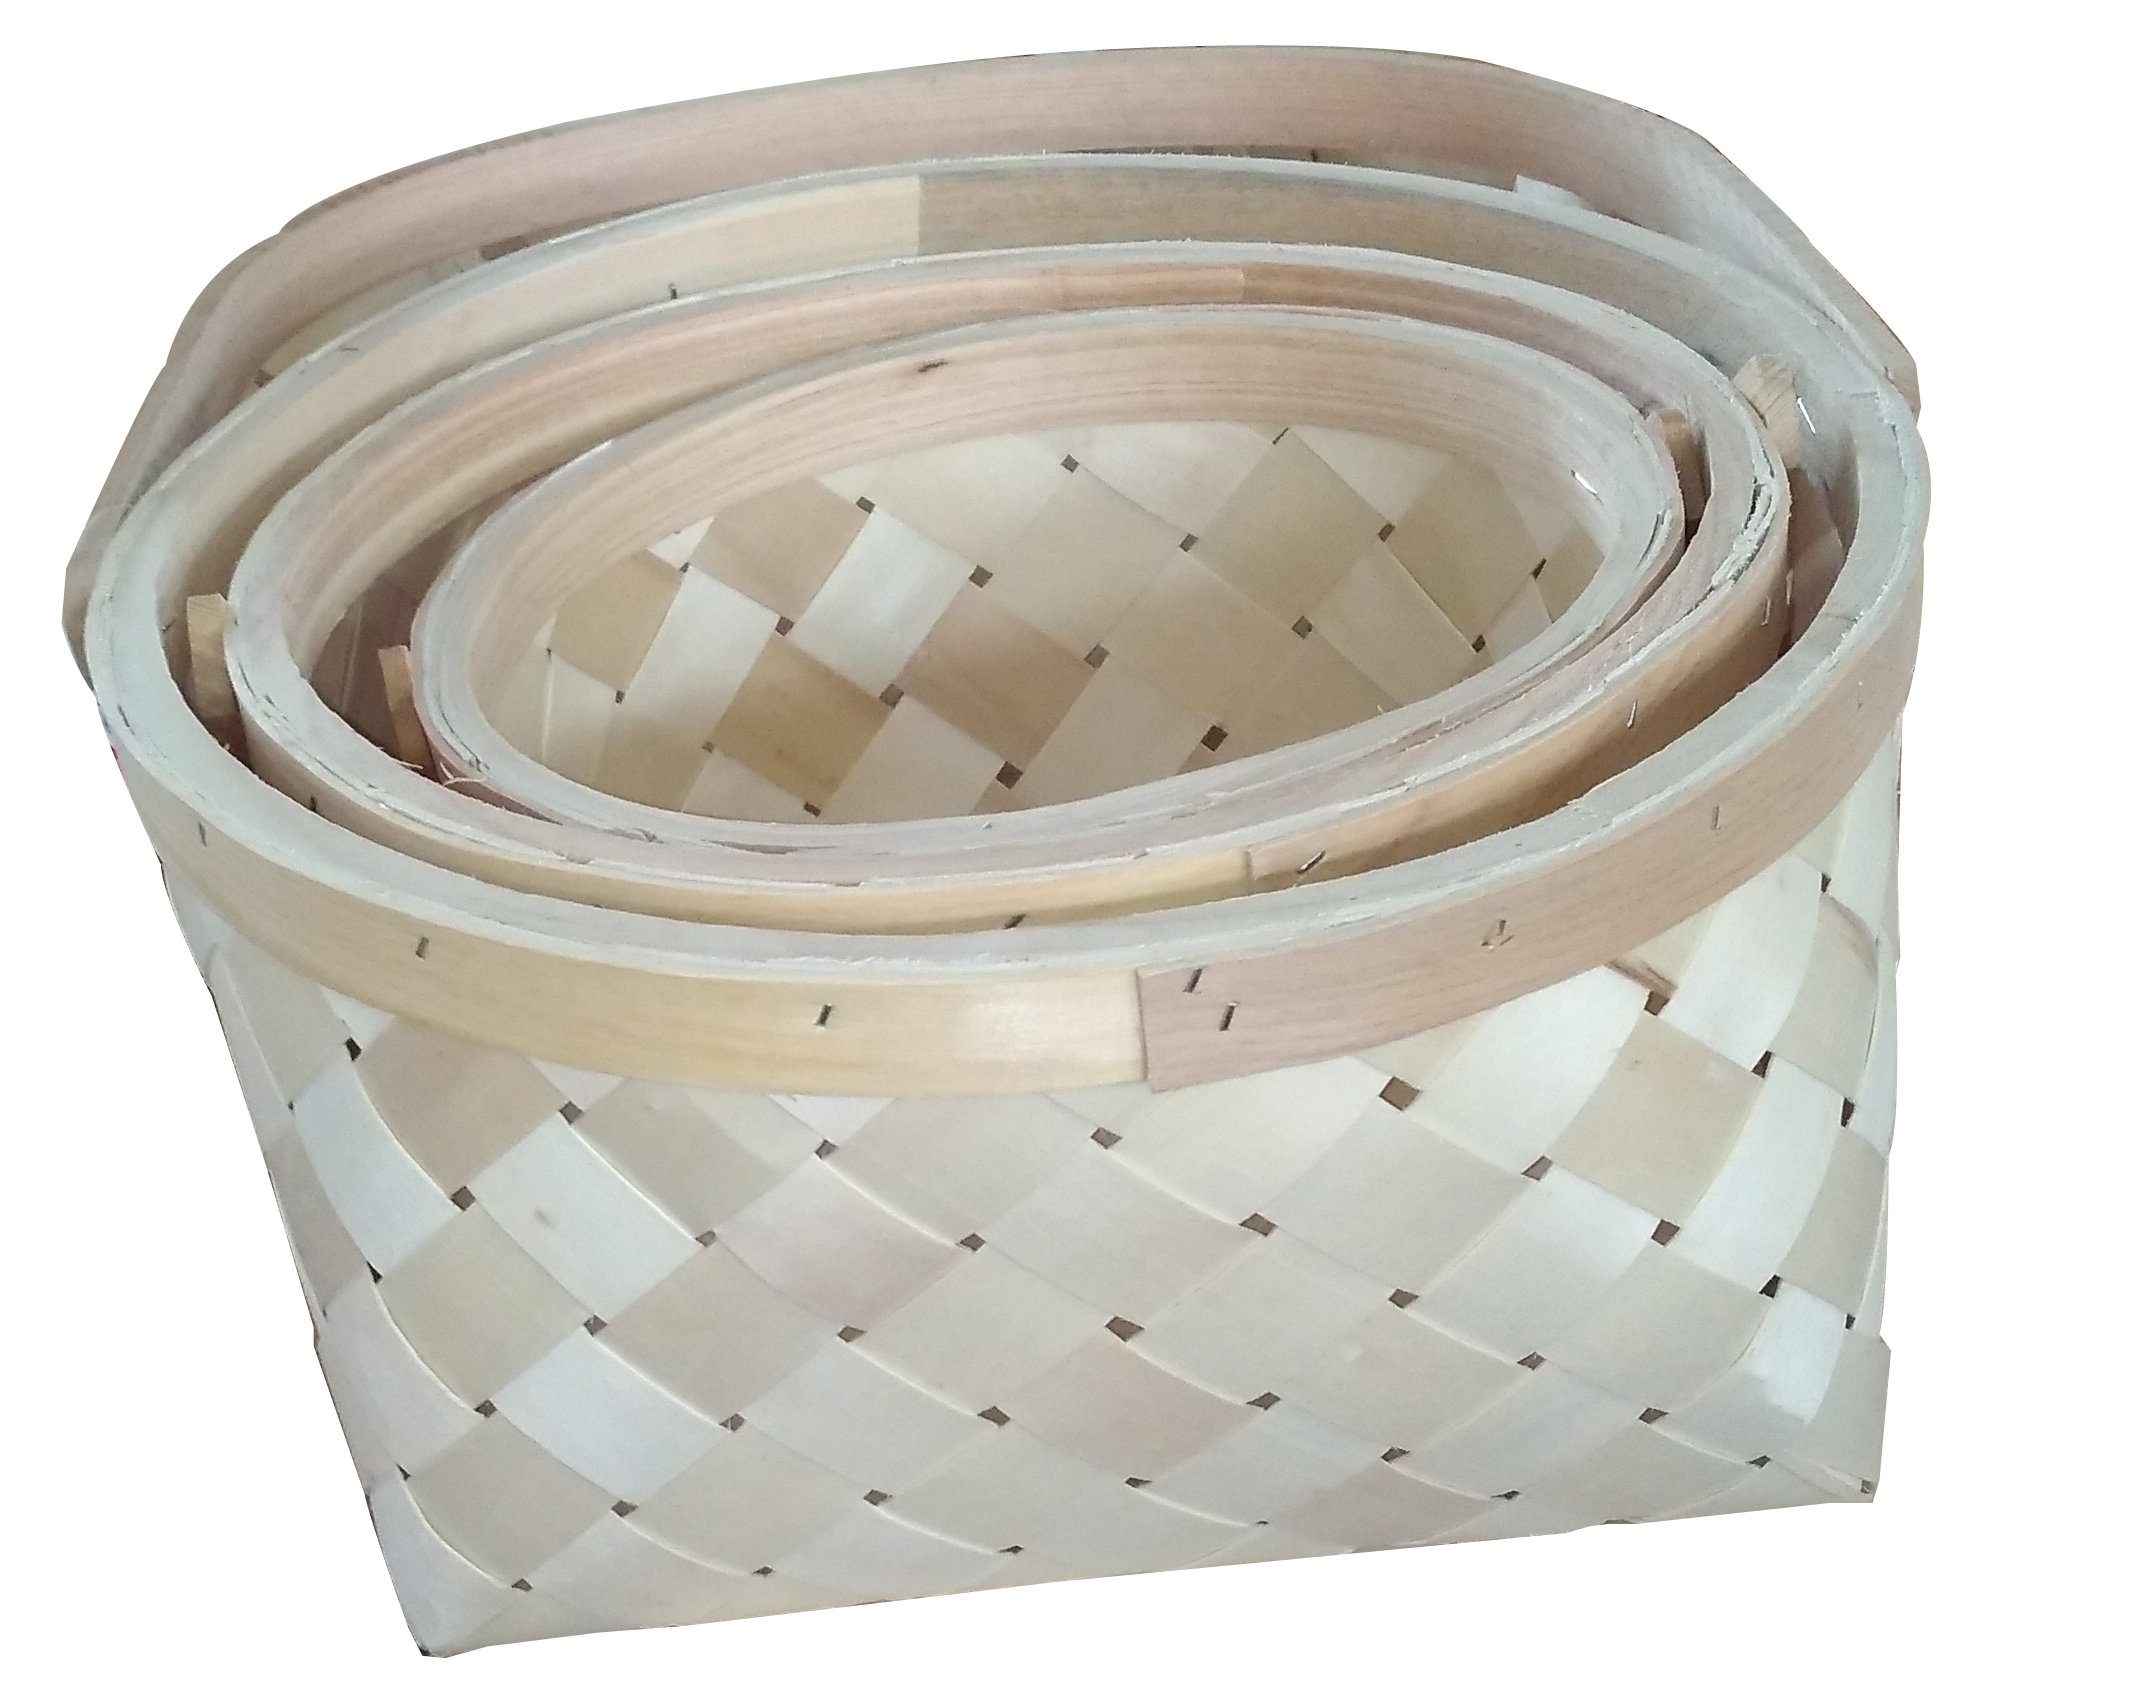 wood chip basket with handles